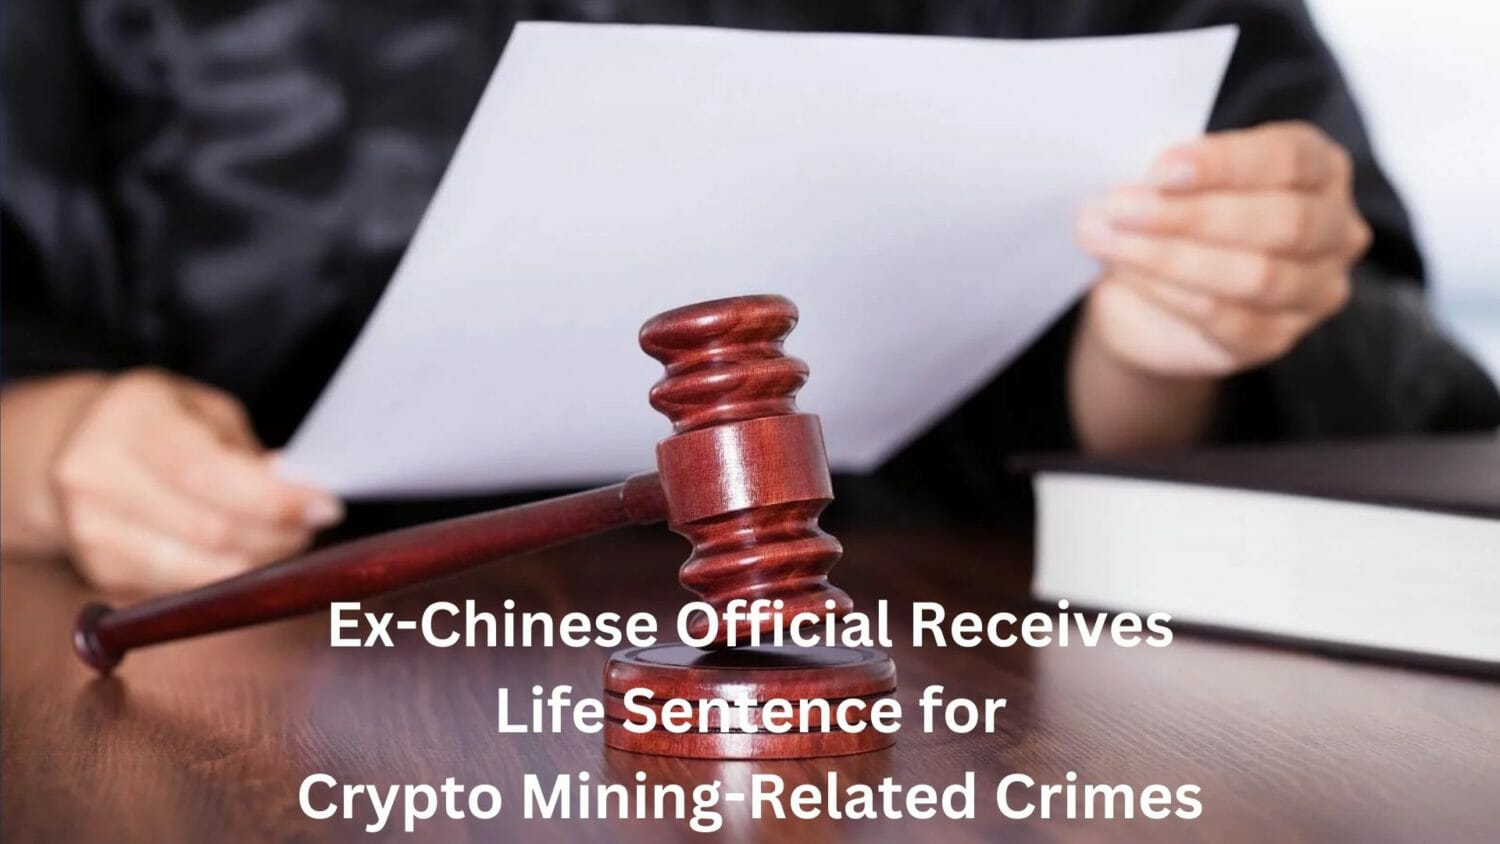 Ex-Chinese Official Receives Life Sentence For Crypto Mining-Related Crimes